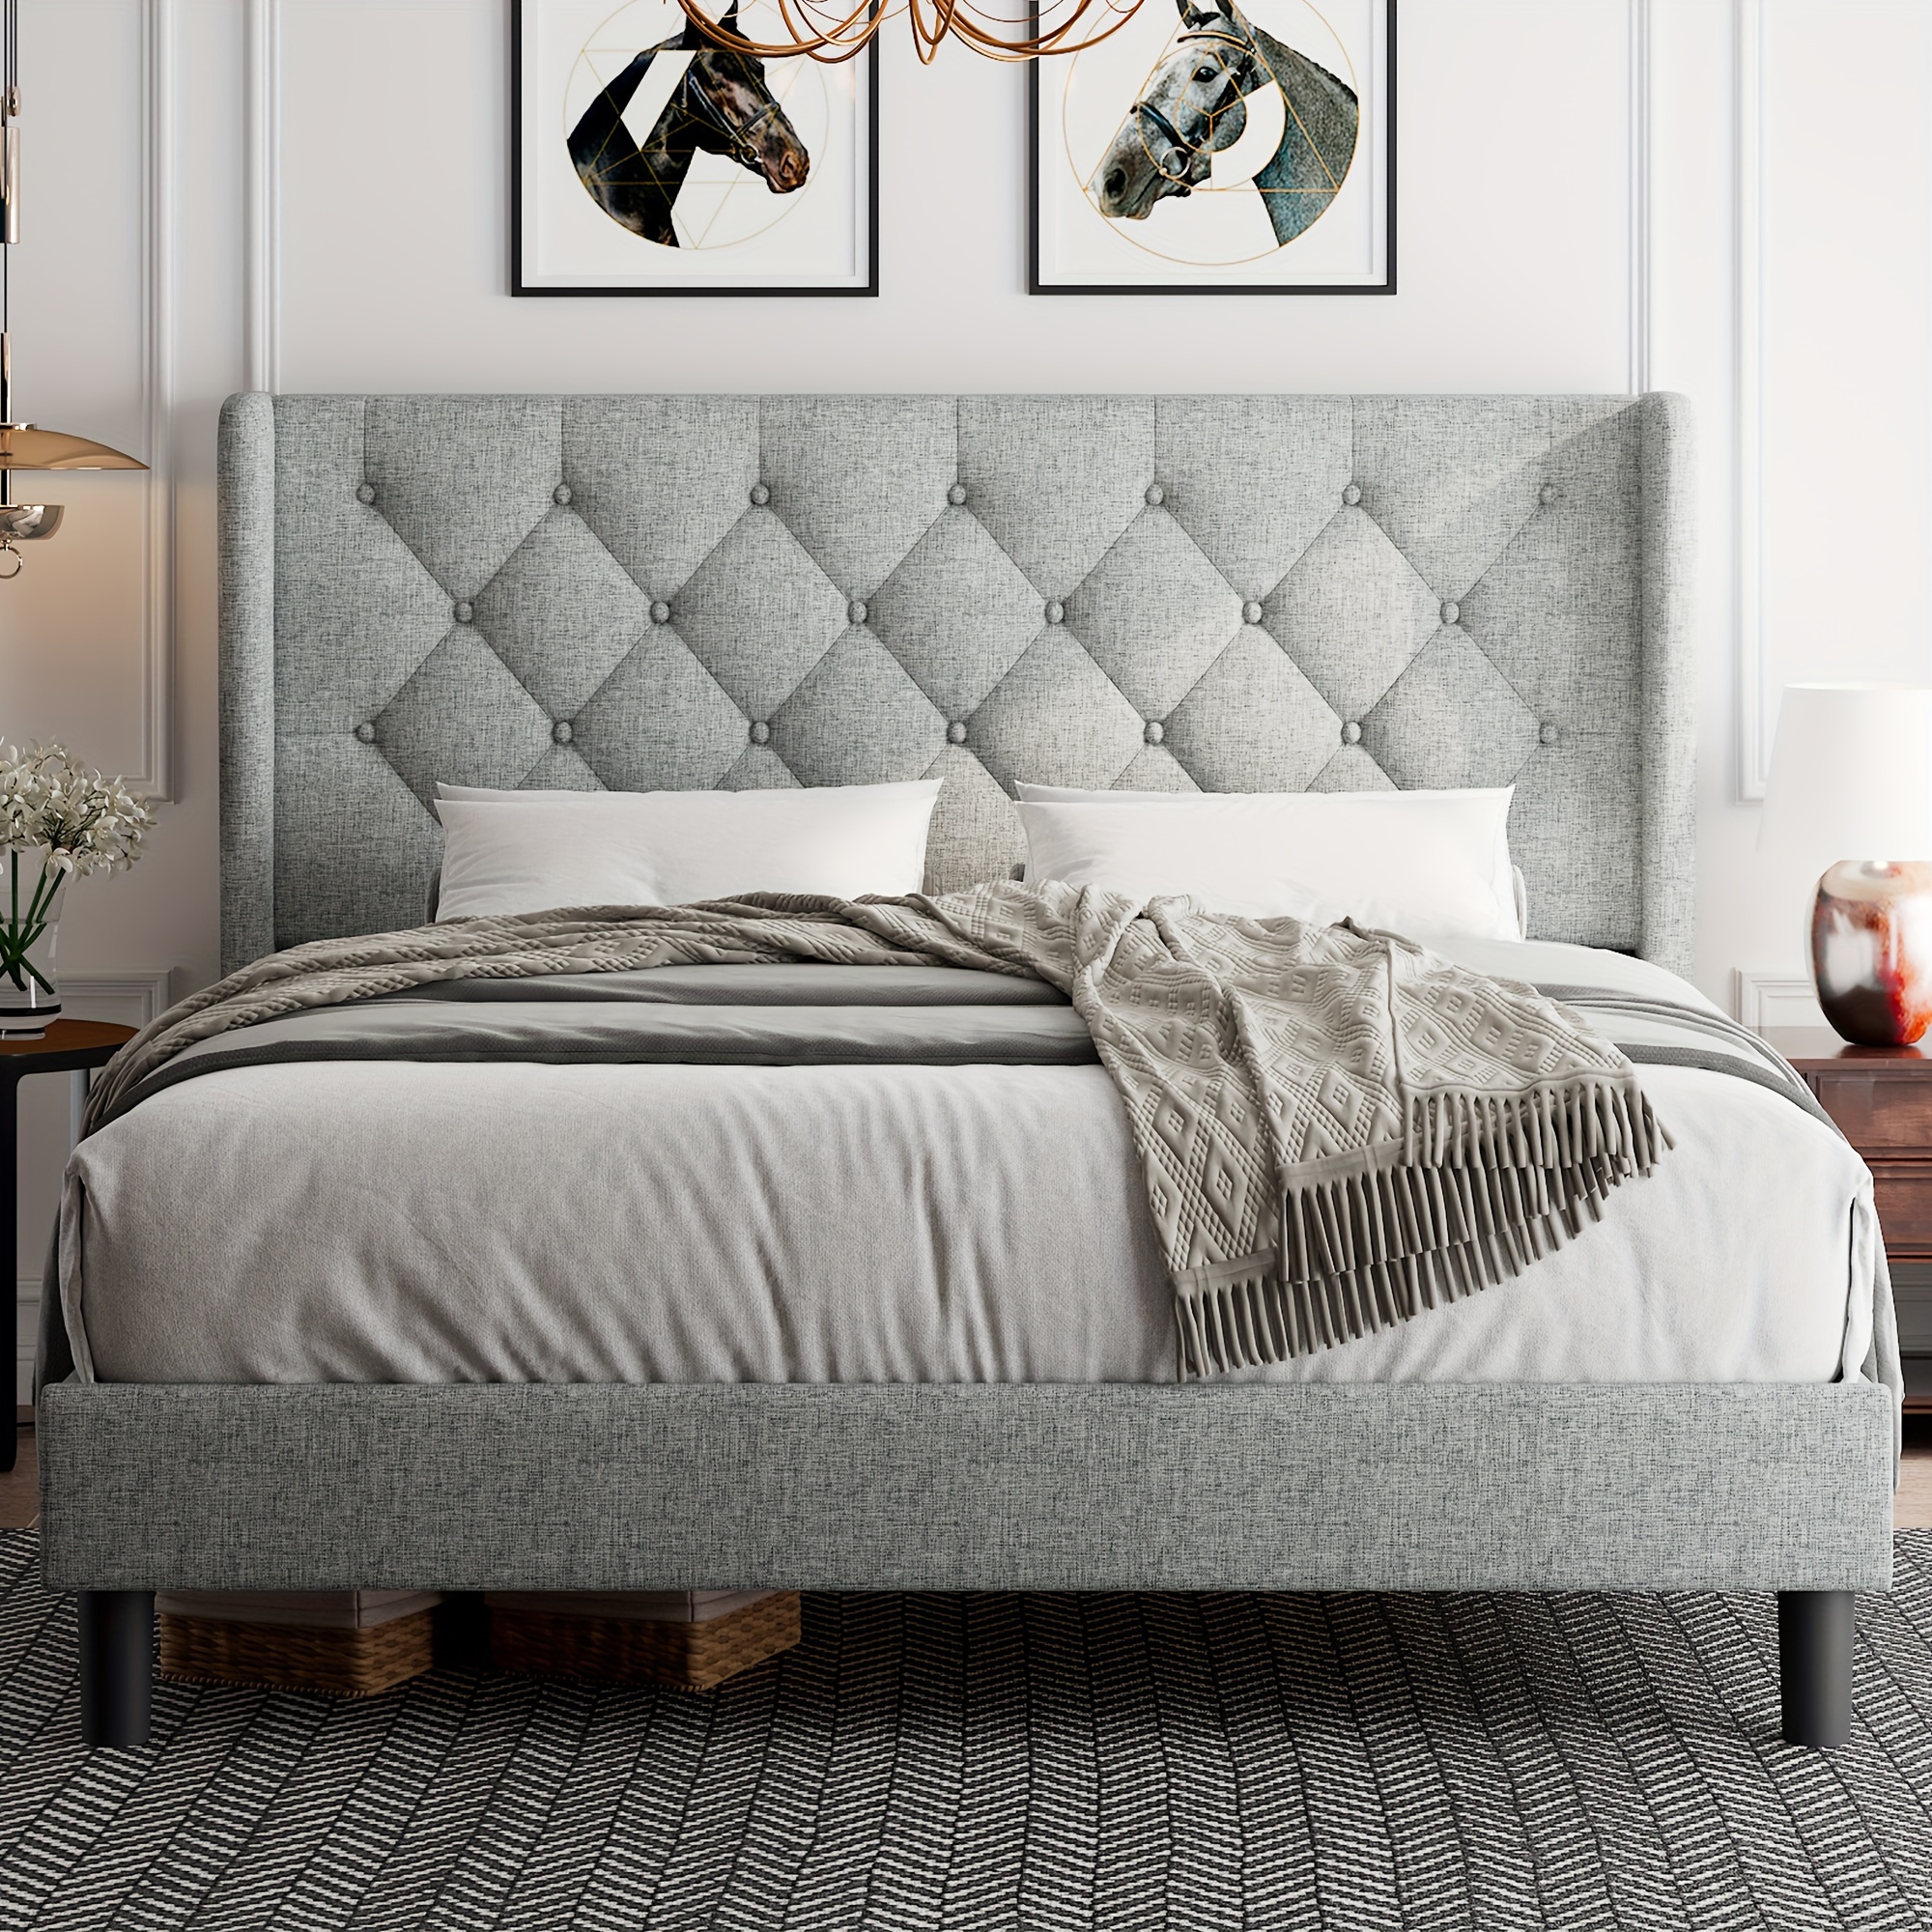 

Bed Frame With Upholstered Wingback Headboard, Wooden And Metal Platform Bed, High-density Sponge, Noise-free, No Box Spring Needed, Easy Assembly